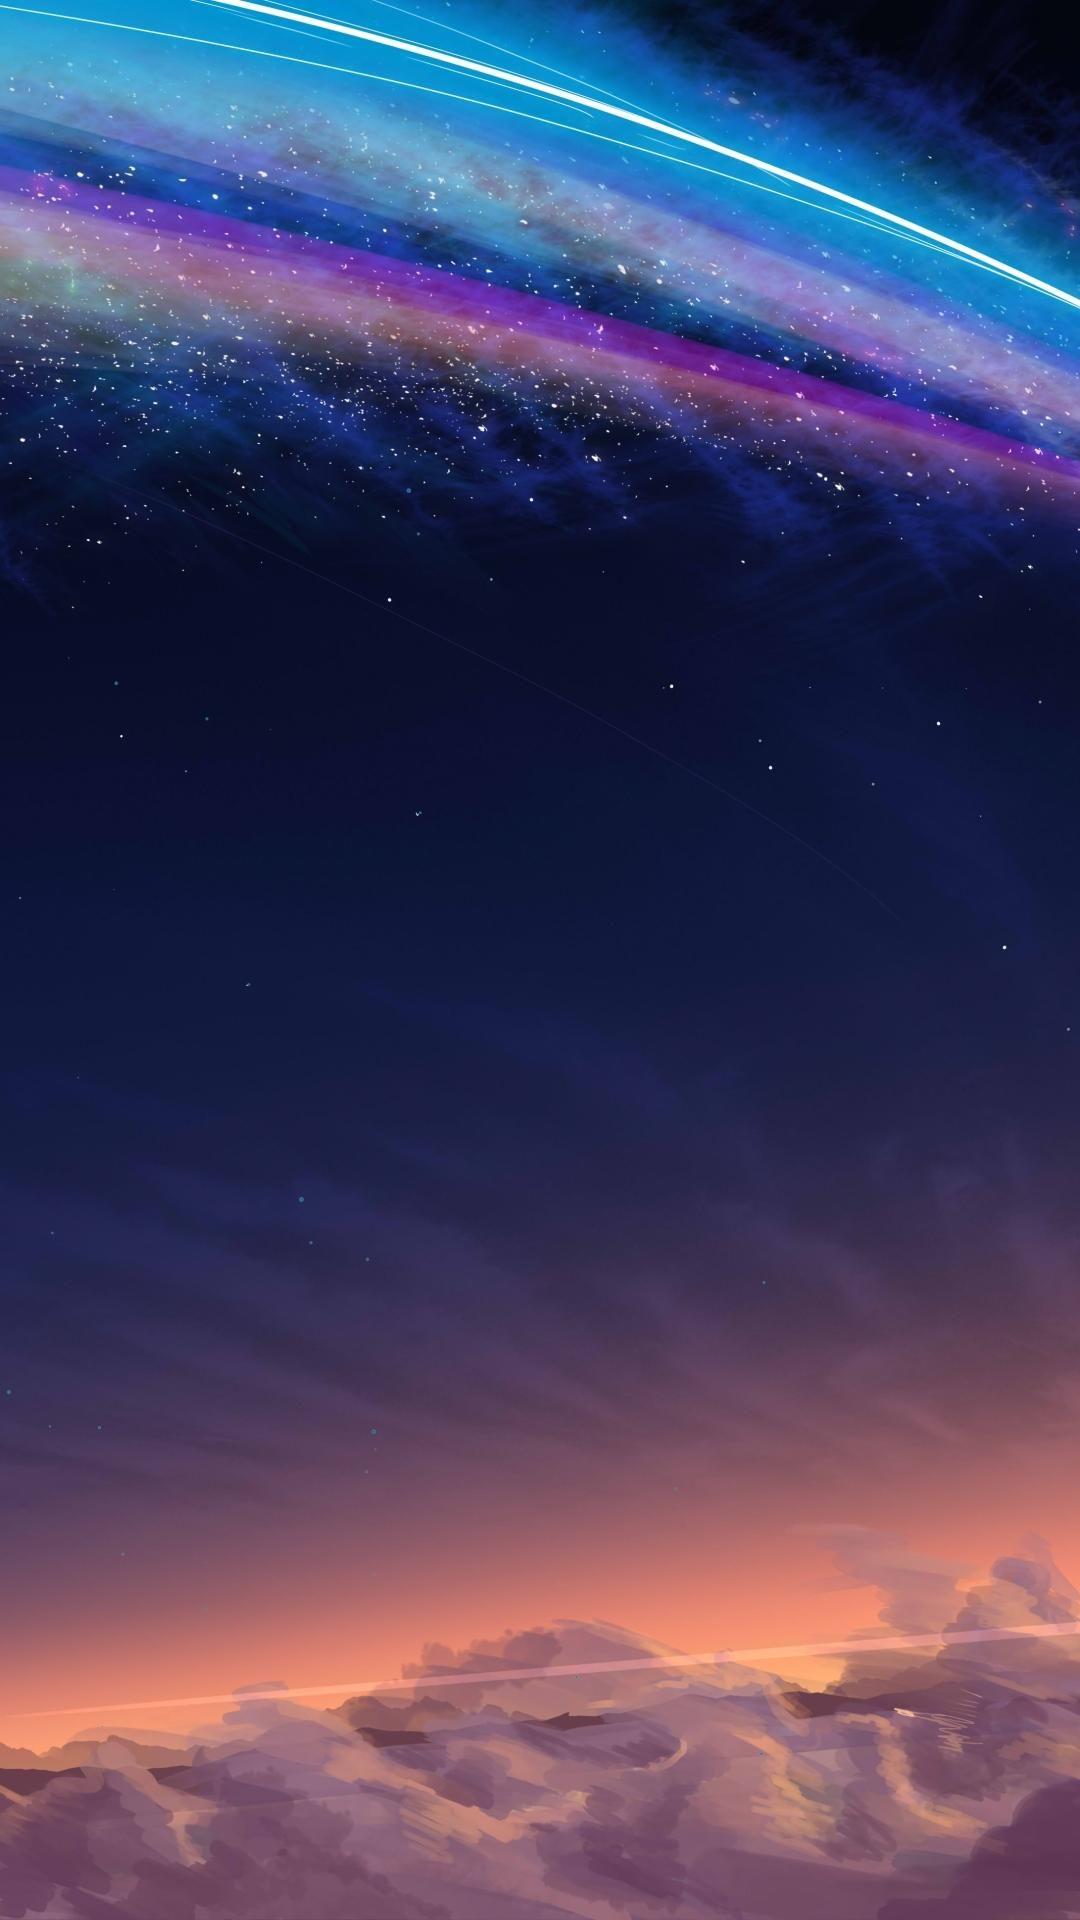 Your Name iPhone Wallpapers - Top Free